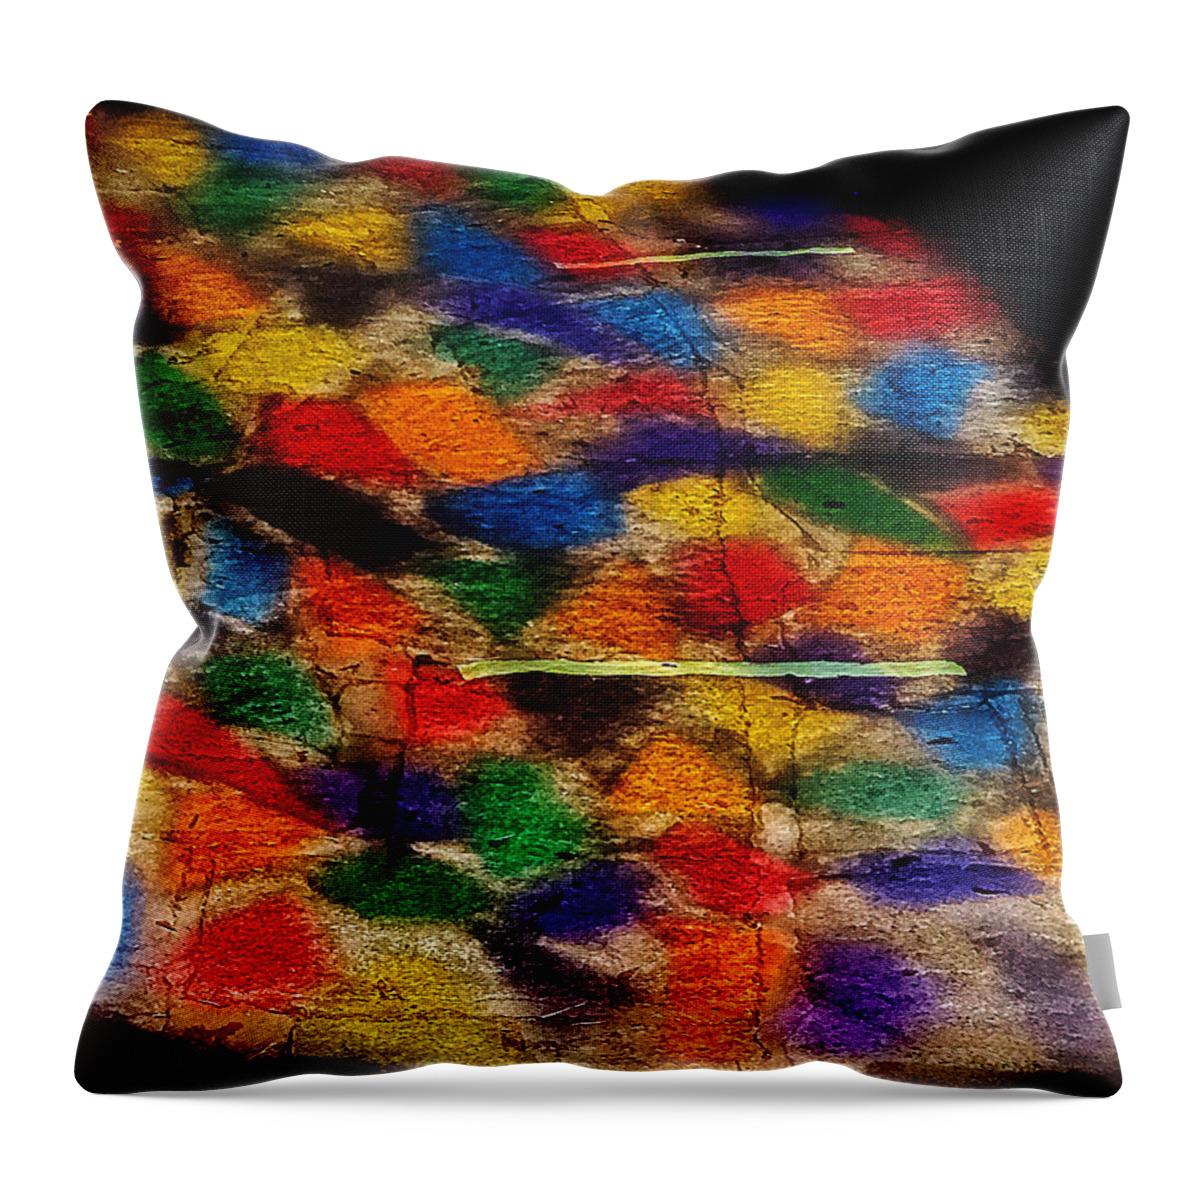  Throw Pillow featuring the photograph Sidewalk Stain Glass by Stephen Dorton